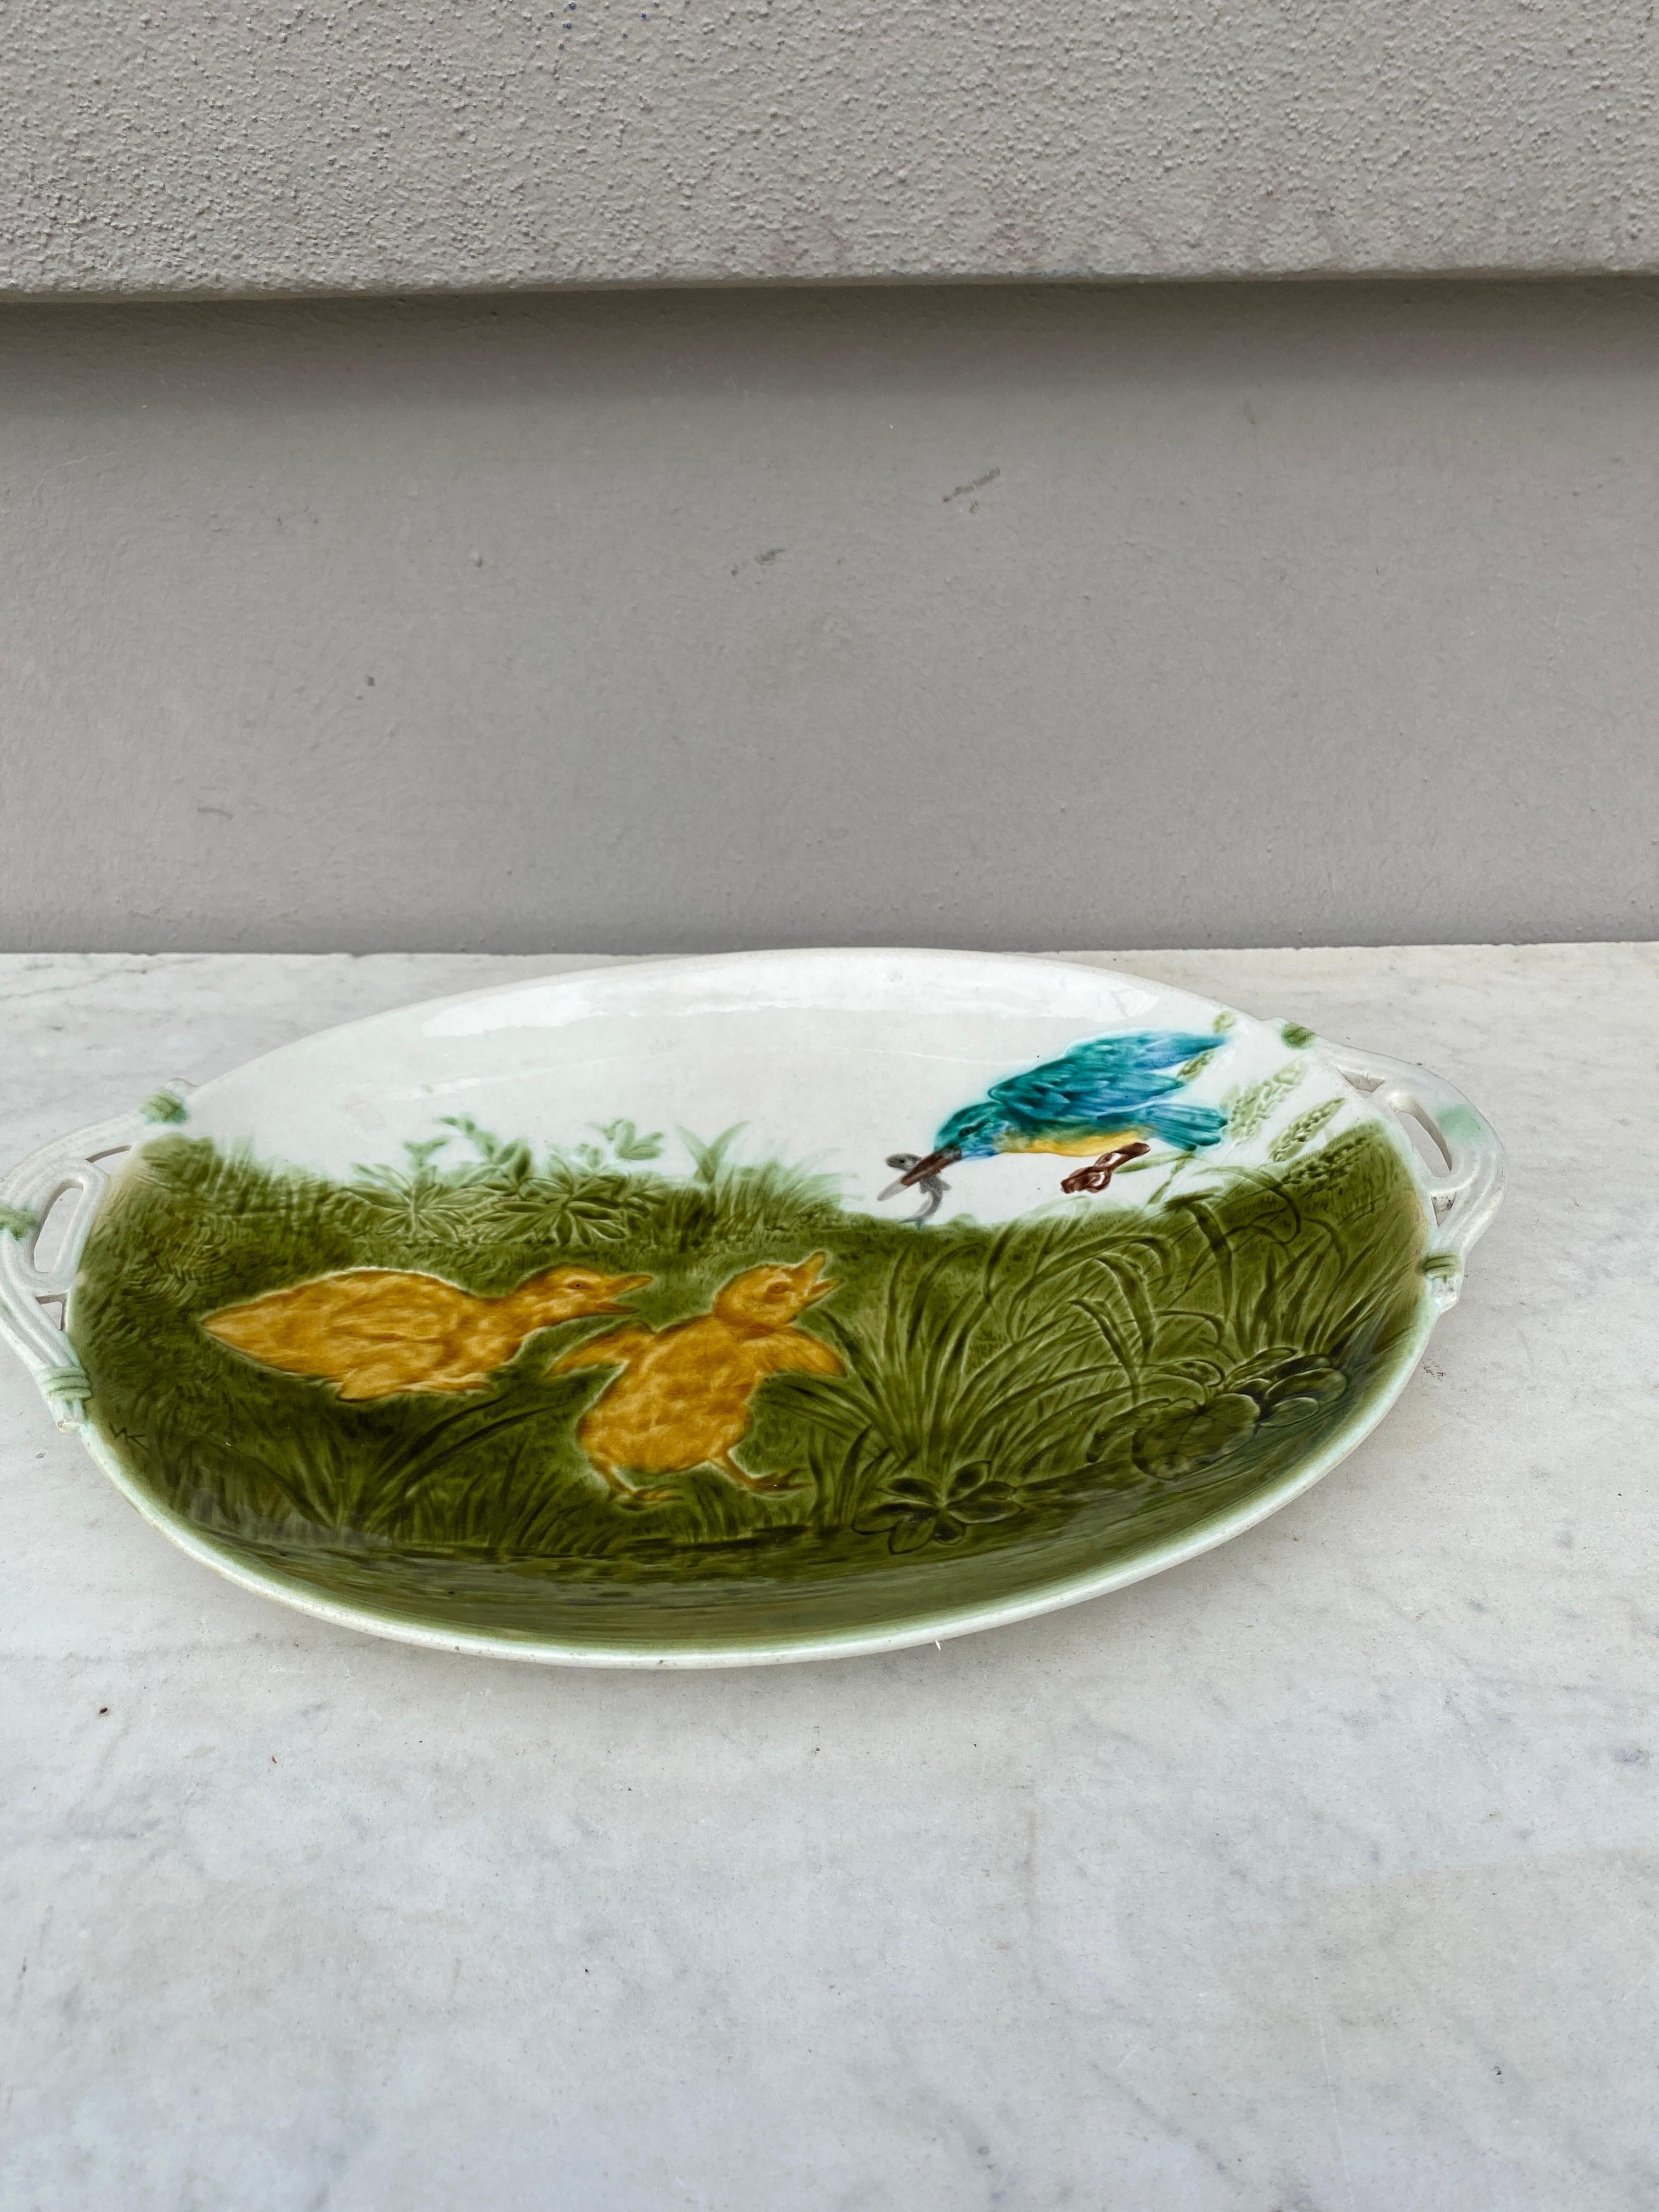 Rustic French Oval Majolica Ducklings Platter Sarreguemines, circa 1890 For Sale